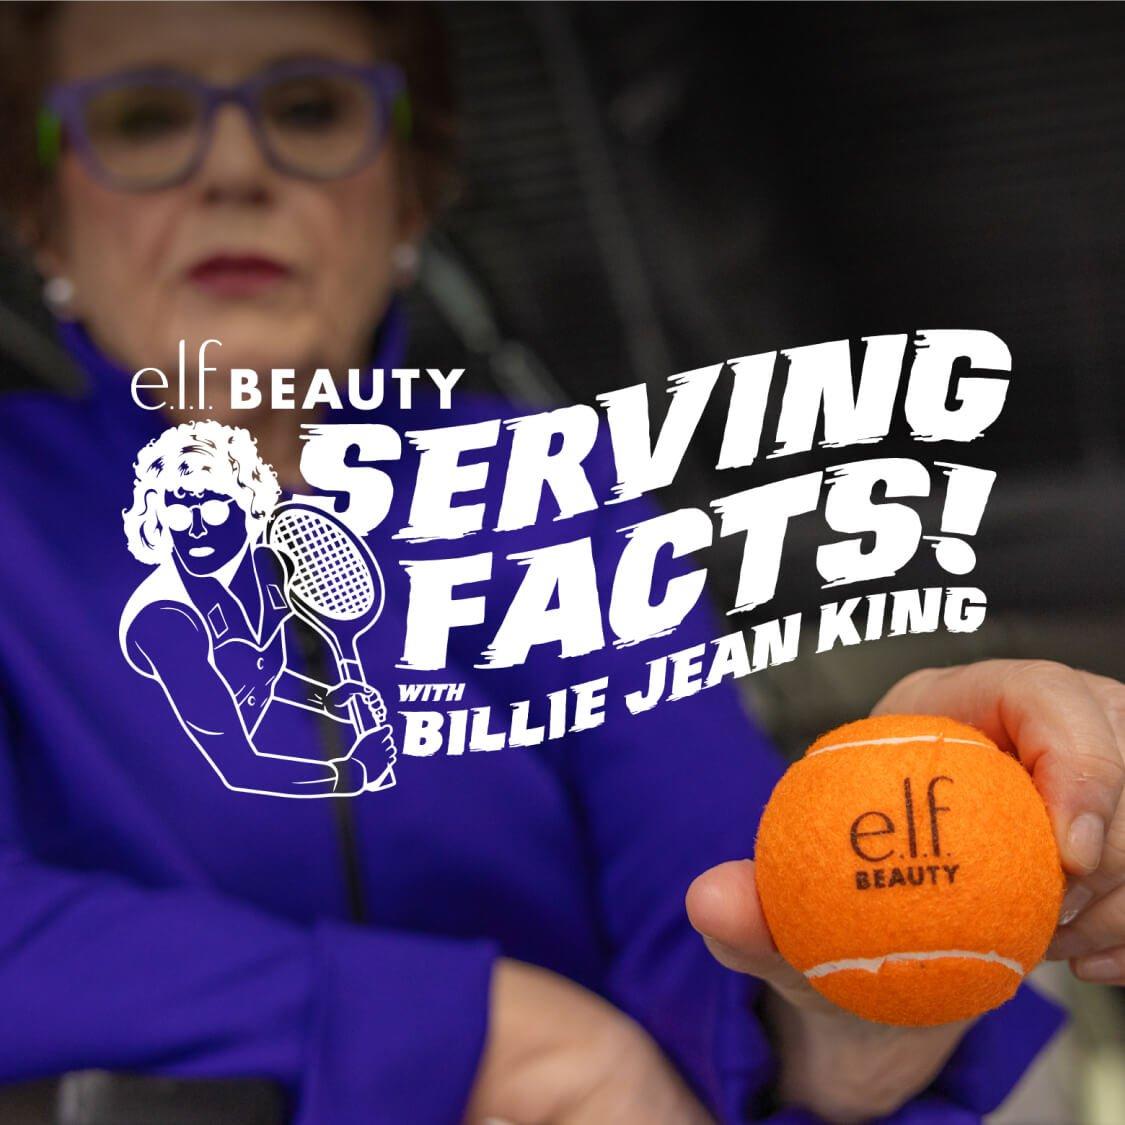 e.l.f. Beauty Serving Facts! With Billie Jean King